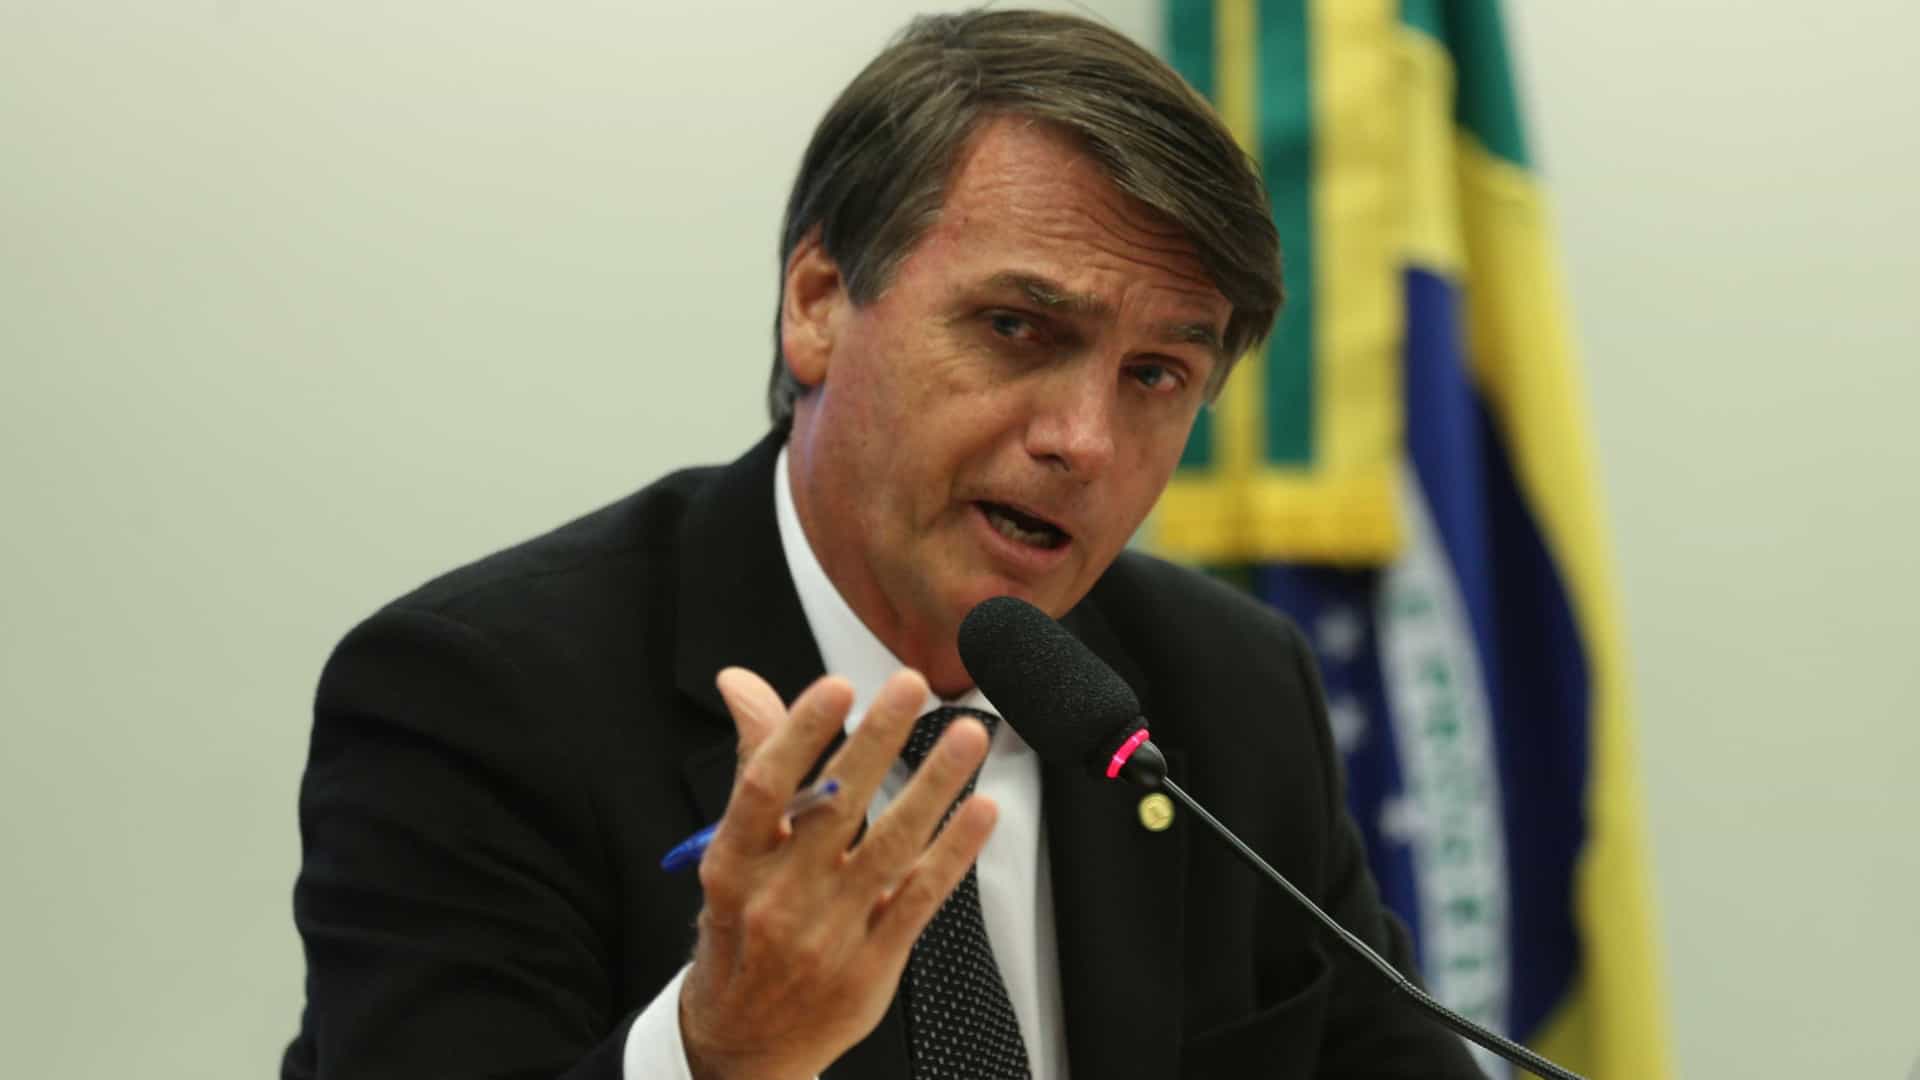 Brazilian President Jair Bolsonaro first said that he is the one in charge of the nomination of the Chief of the Federal Police in Rio de Janeiro, but after some criticism, he softened his speech by stating that it doesn't matter to him who gets appointed.